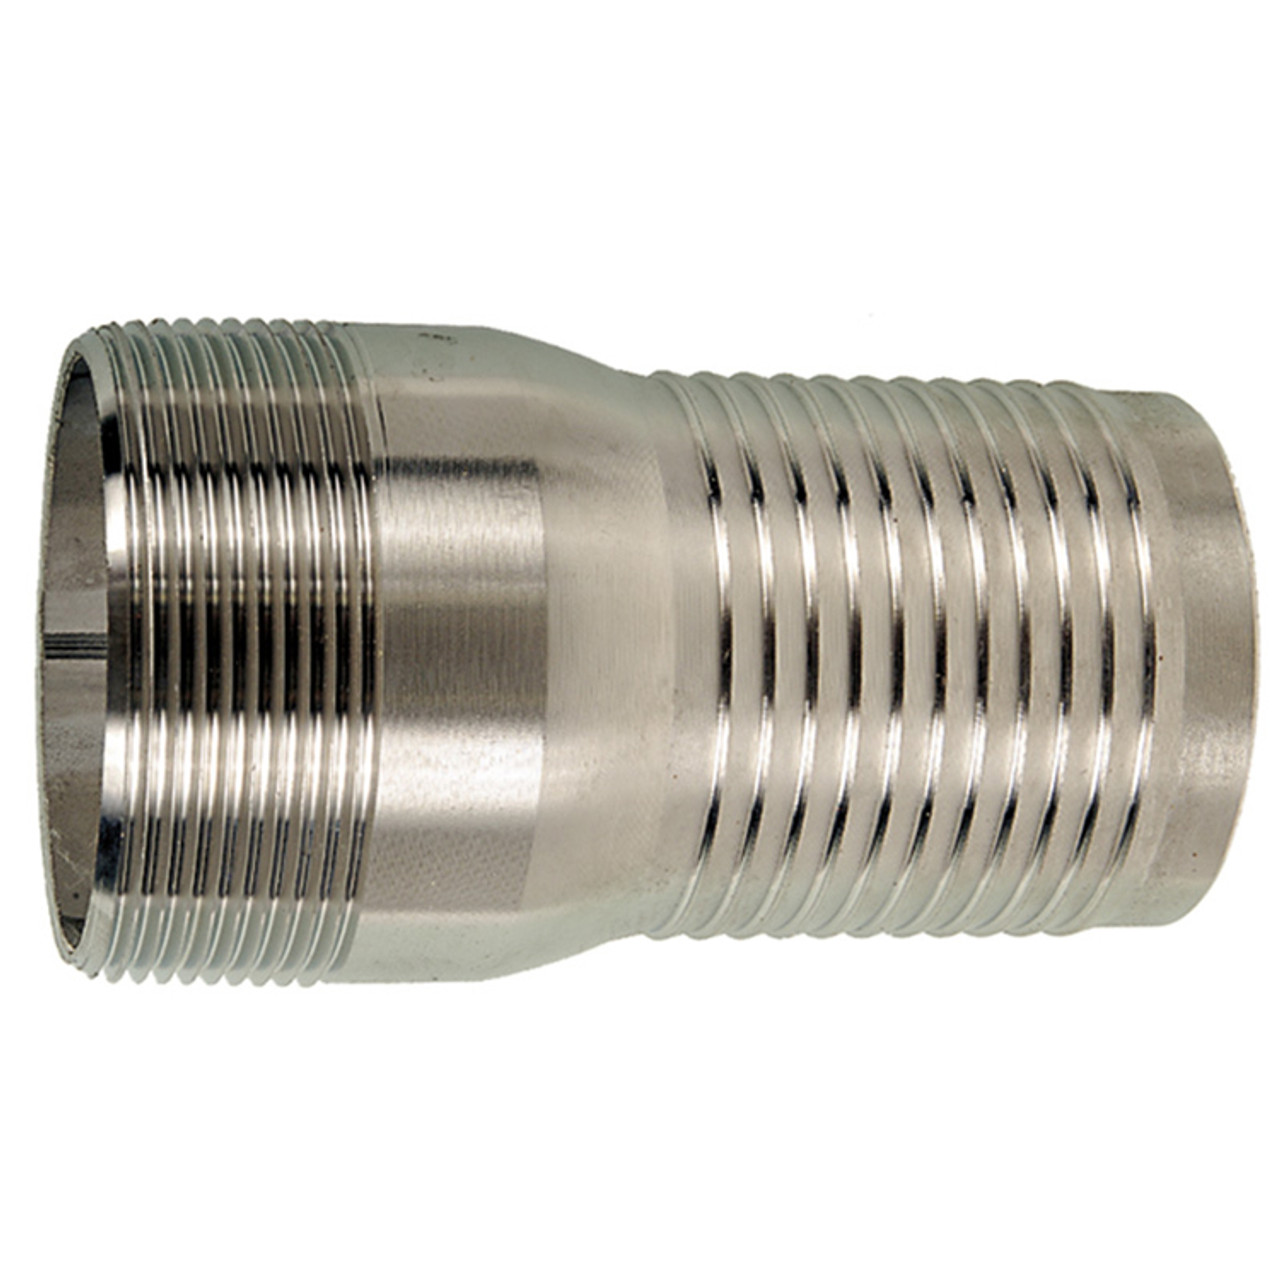 1 x 1" Stainless Steel Hose Barb - Male NPT  G33SS-100